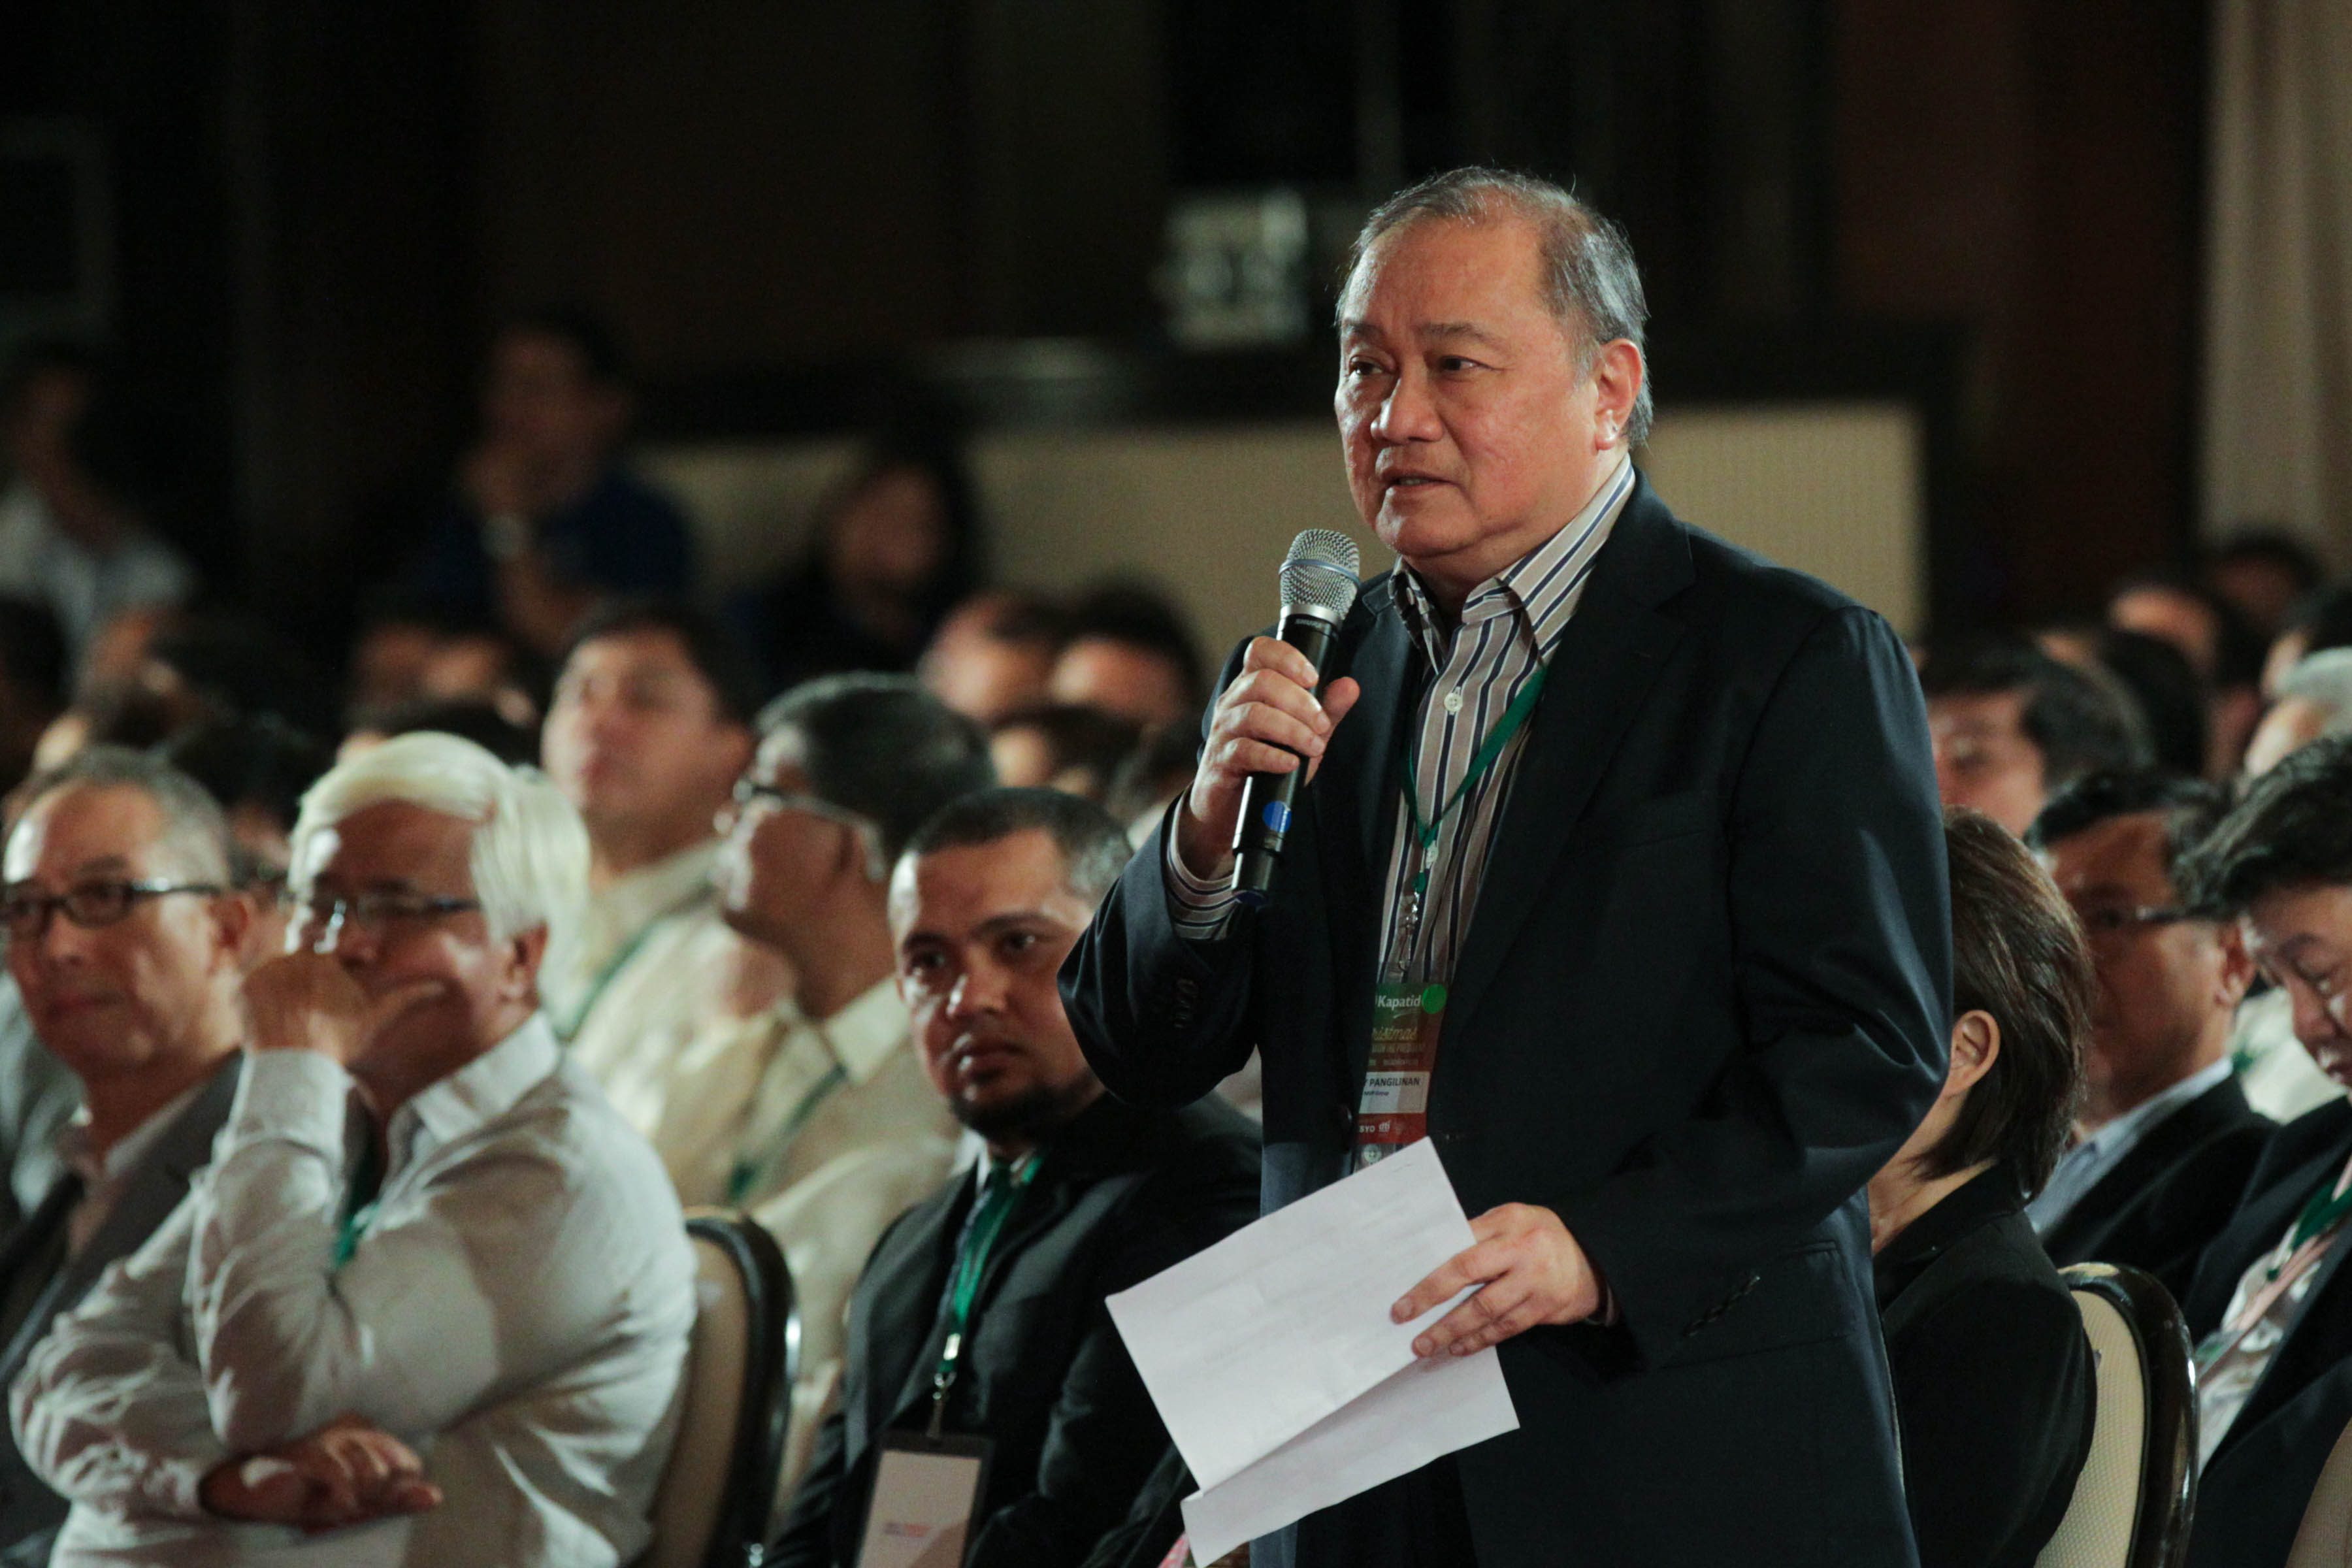 PLEDGE FOR SULU. Businessman Manny V Pangilinan speaks at the Go Negosyo event for Sulu development in Malacañang. Photo from PPD 